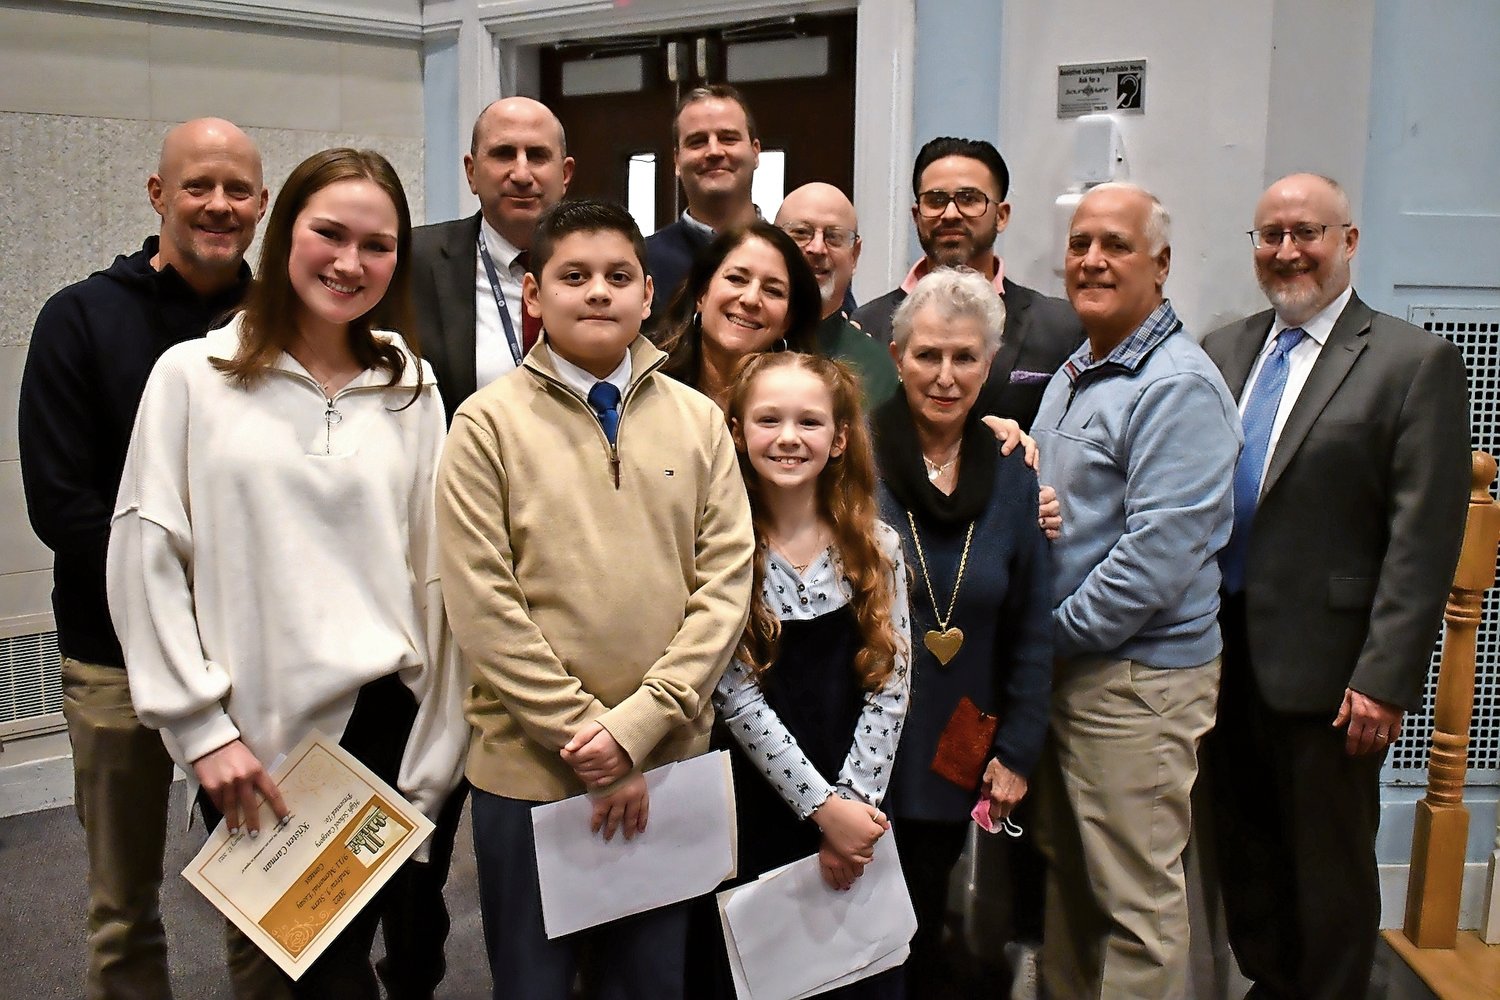 Andrew J. Stern Memorial Essay Contest winners with members of the Stern family and East Rockaway School District Board of Education and Administration at Jan. 17 meeting where winners were honored.